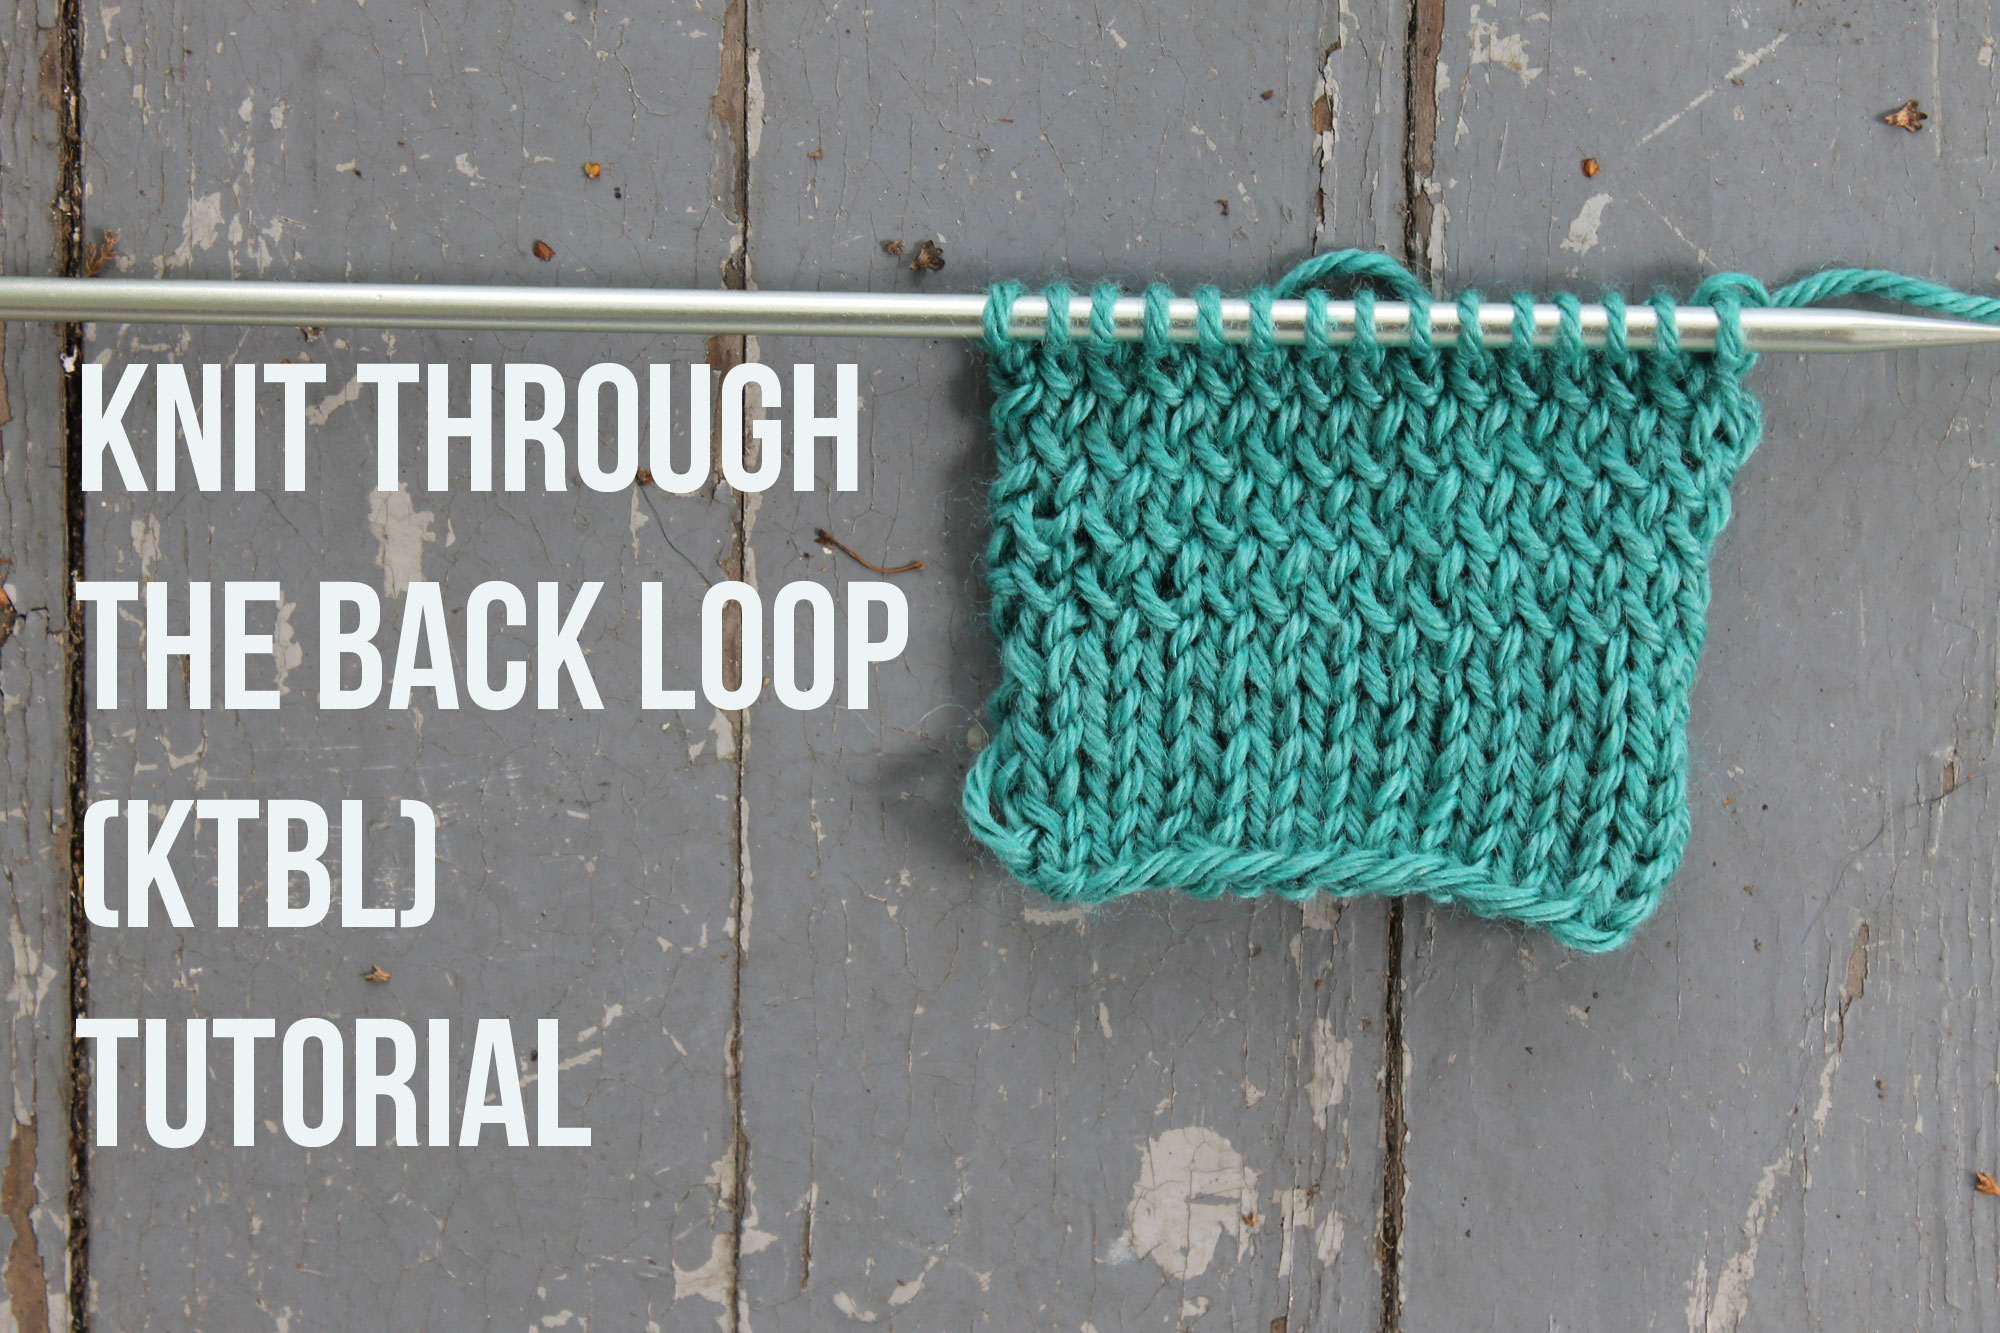 Knit through the back loop tutorial and tips